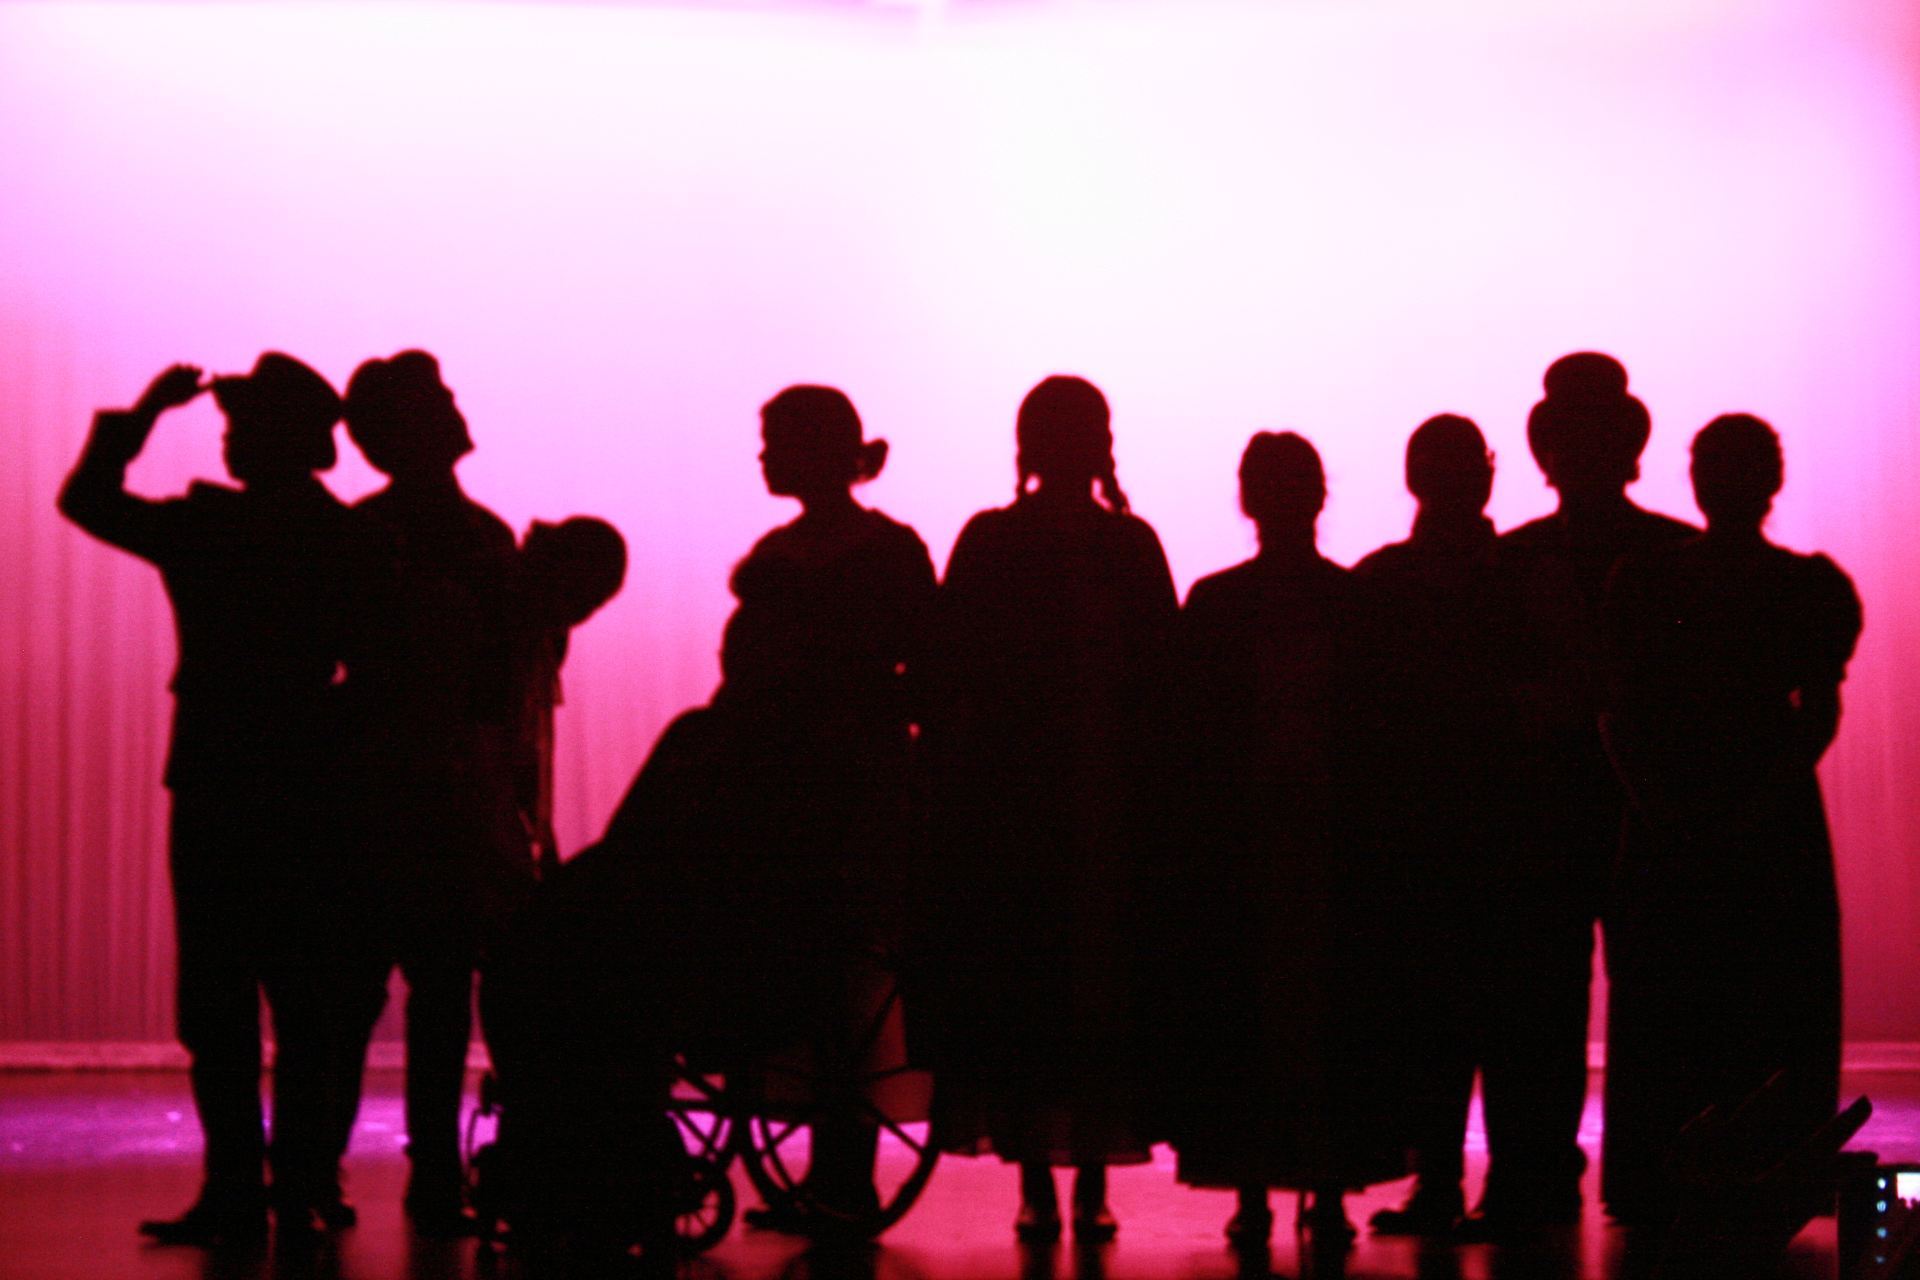 Silhouette of actors on stage